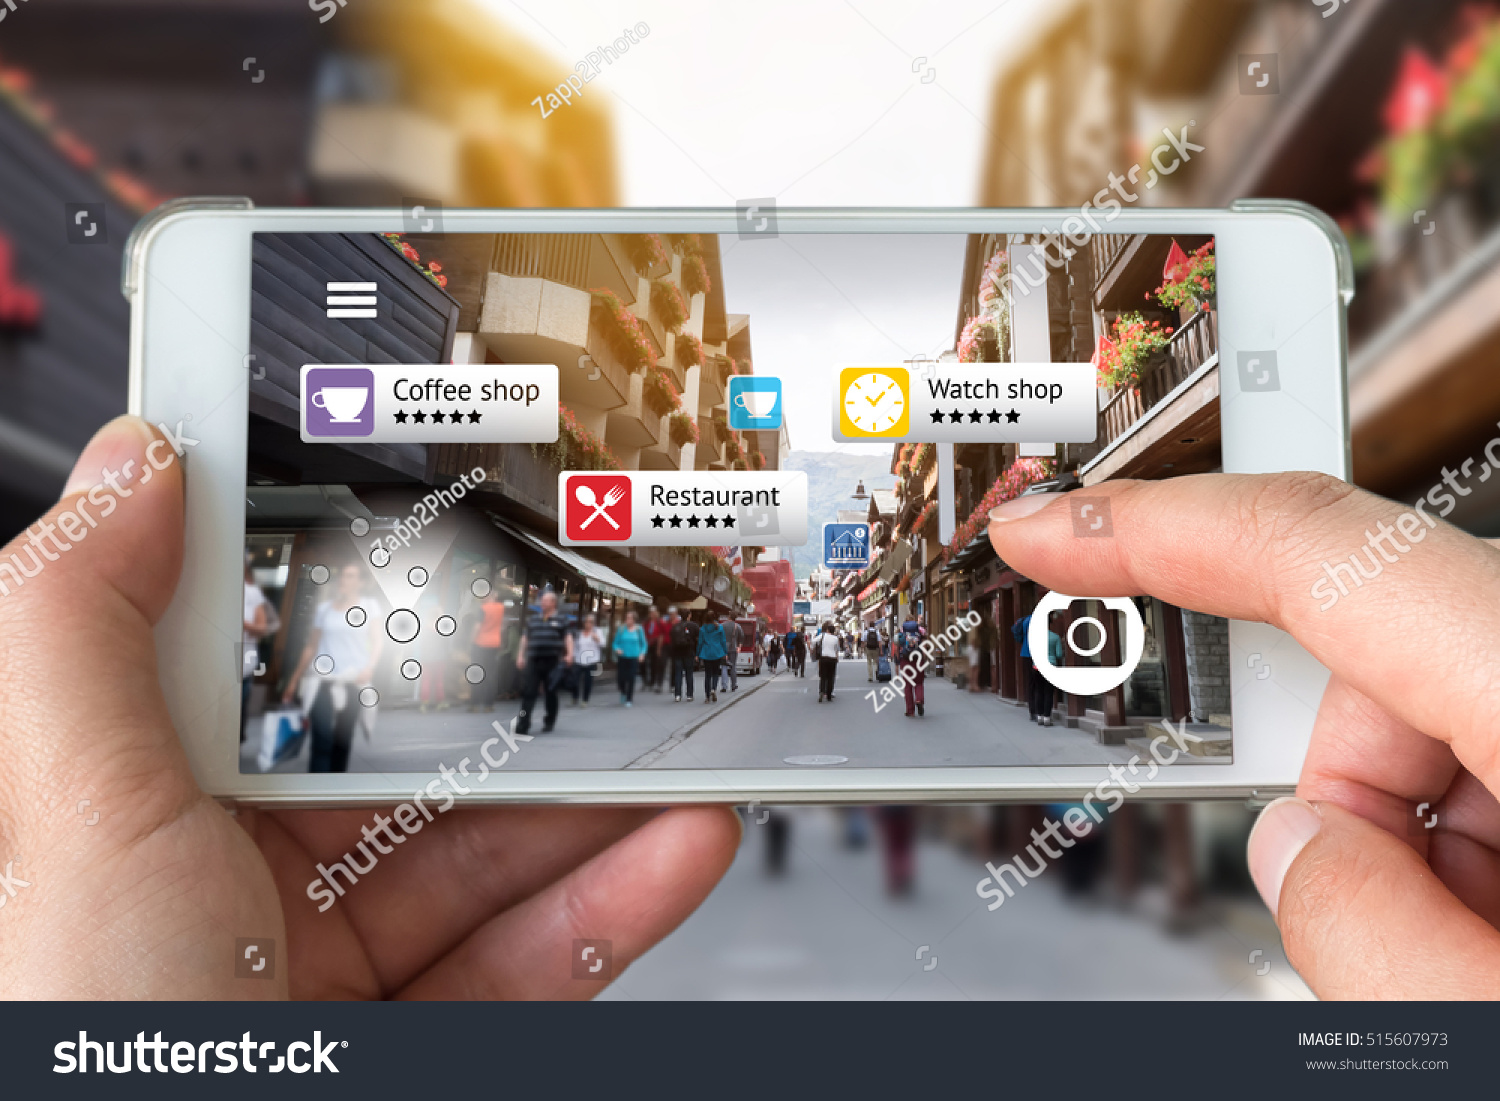 Augmented reality marketing concept. Hand holding smart phone use AR application to check relevant information about the spaces around customer. City and flare light background #515607973